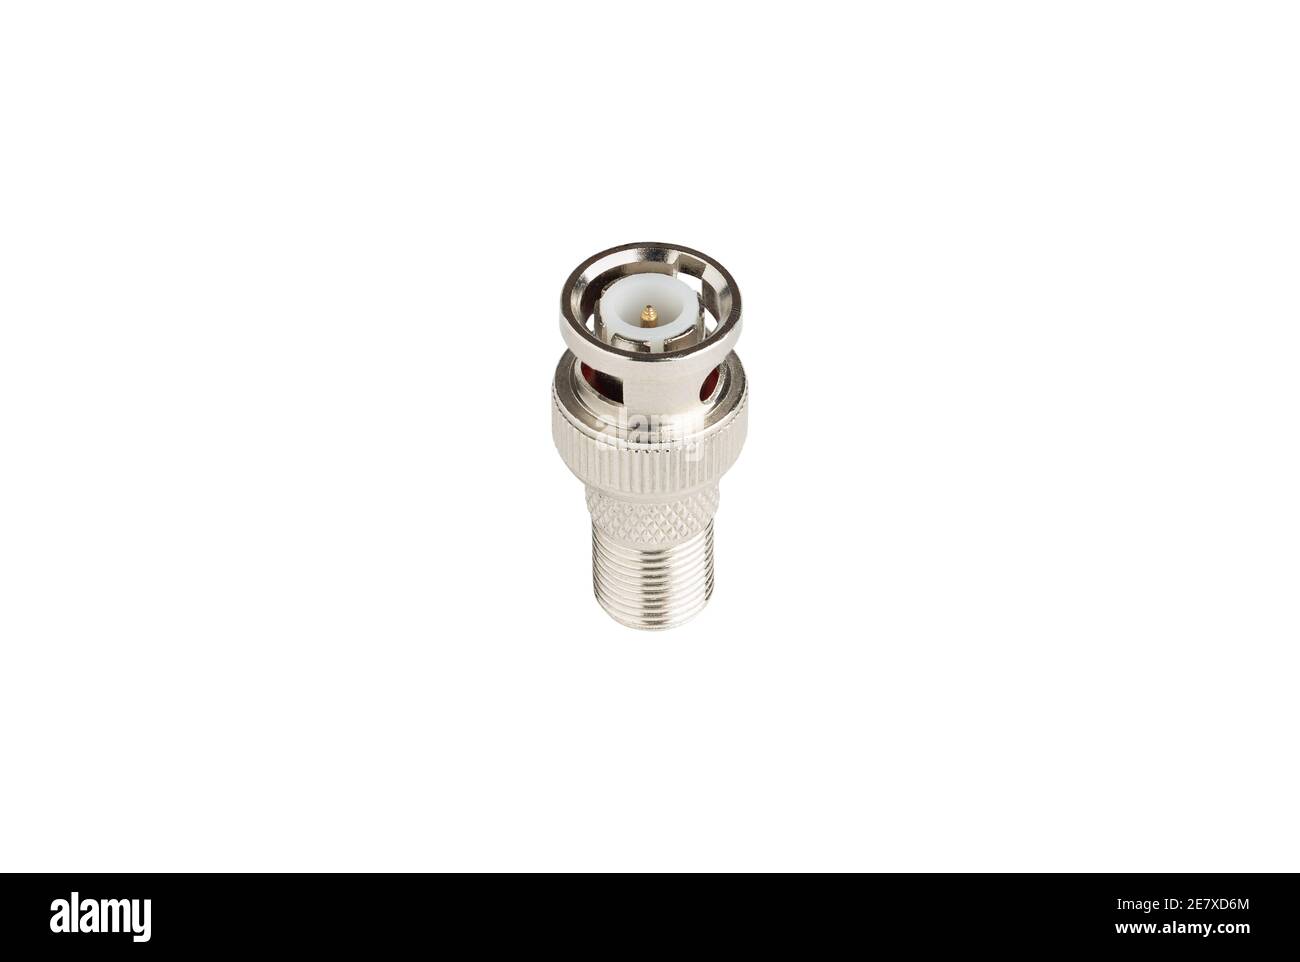 coaxial bnc cctv connector isolated on a white background Stock Photo